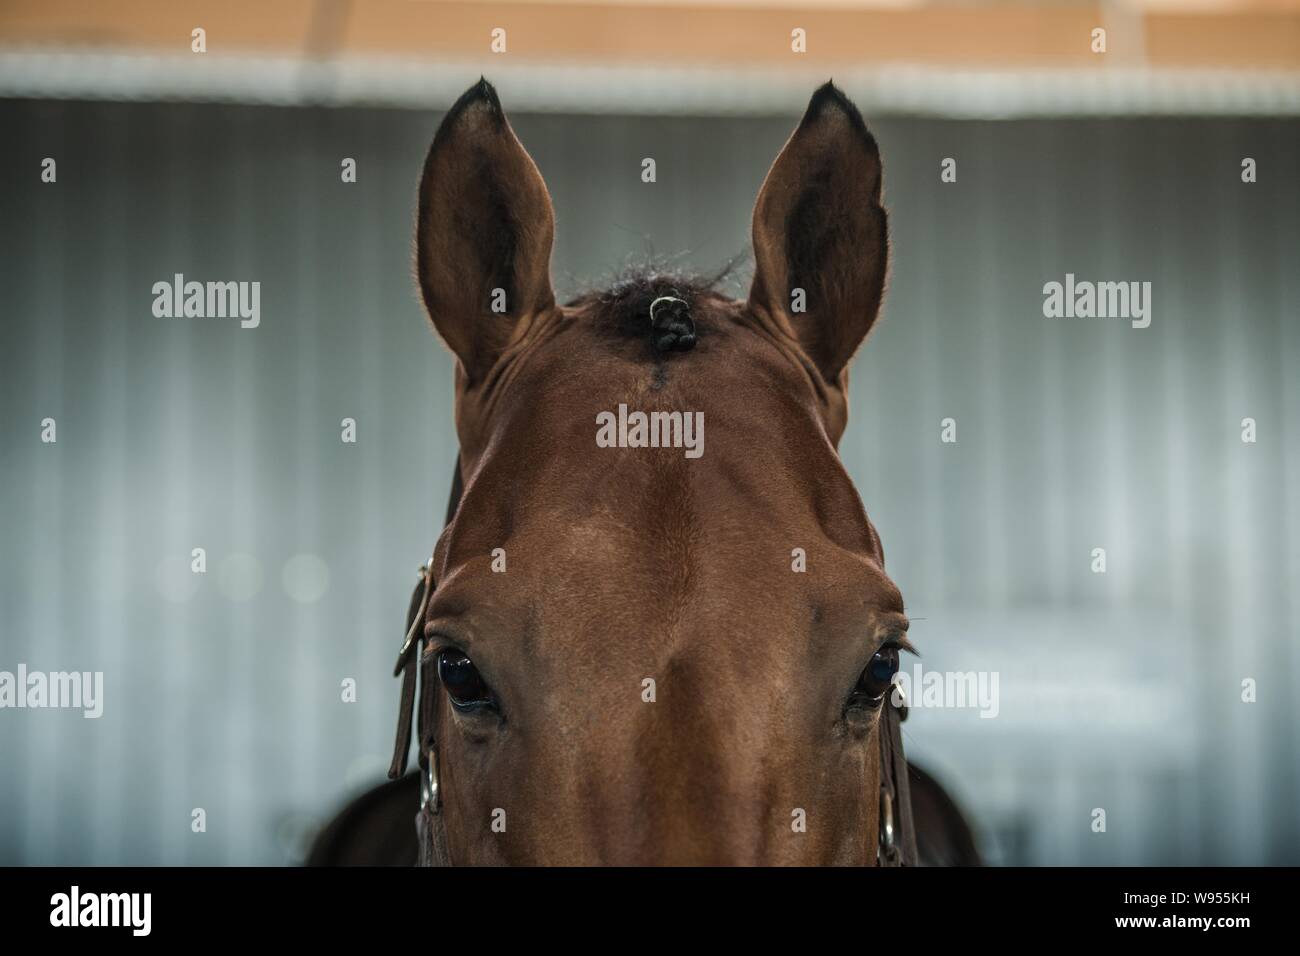 Riding Horse Closeup Portrait. Eyes and Ears. Equestrian Facility Theme. Stock Photo